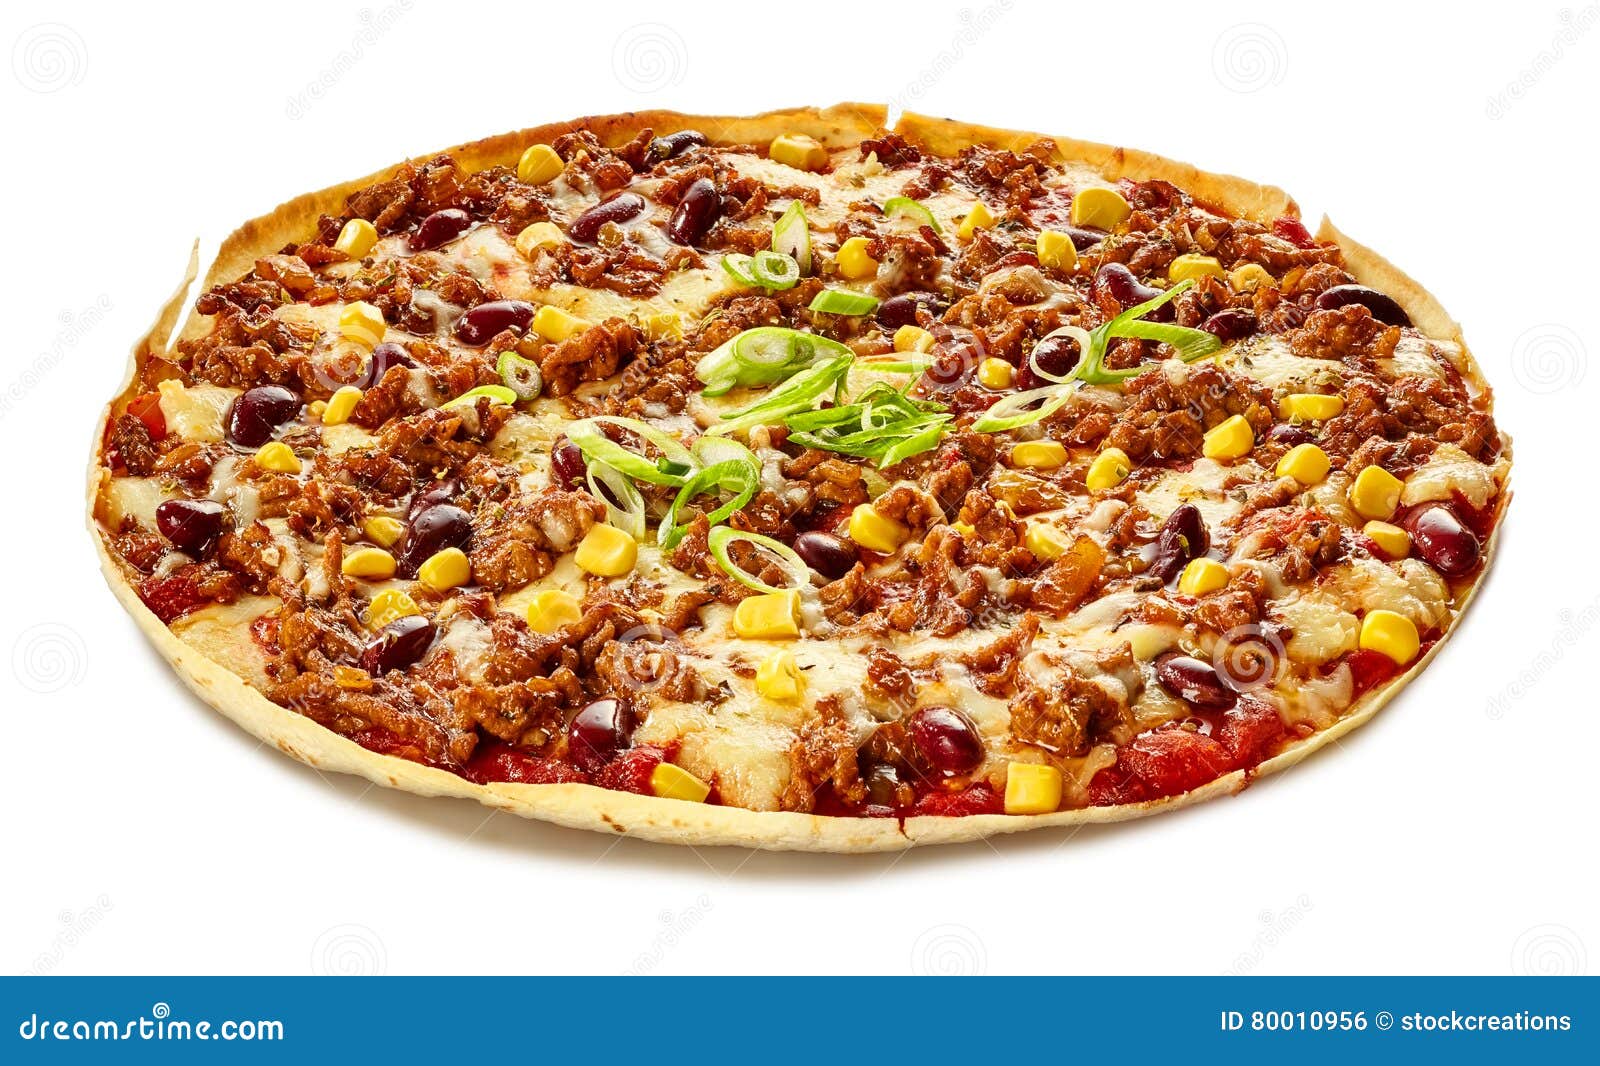 tex-mex tortilla pizza with kidney beans and corn